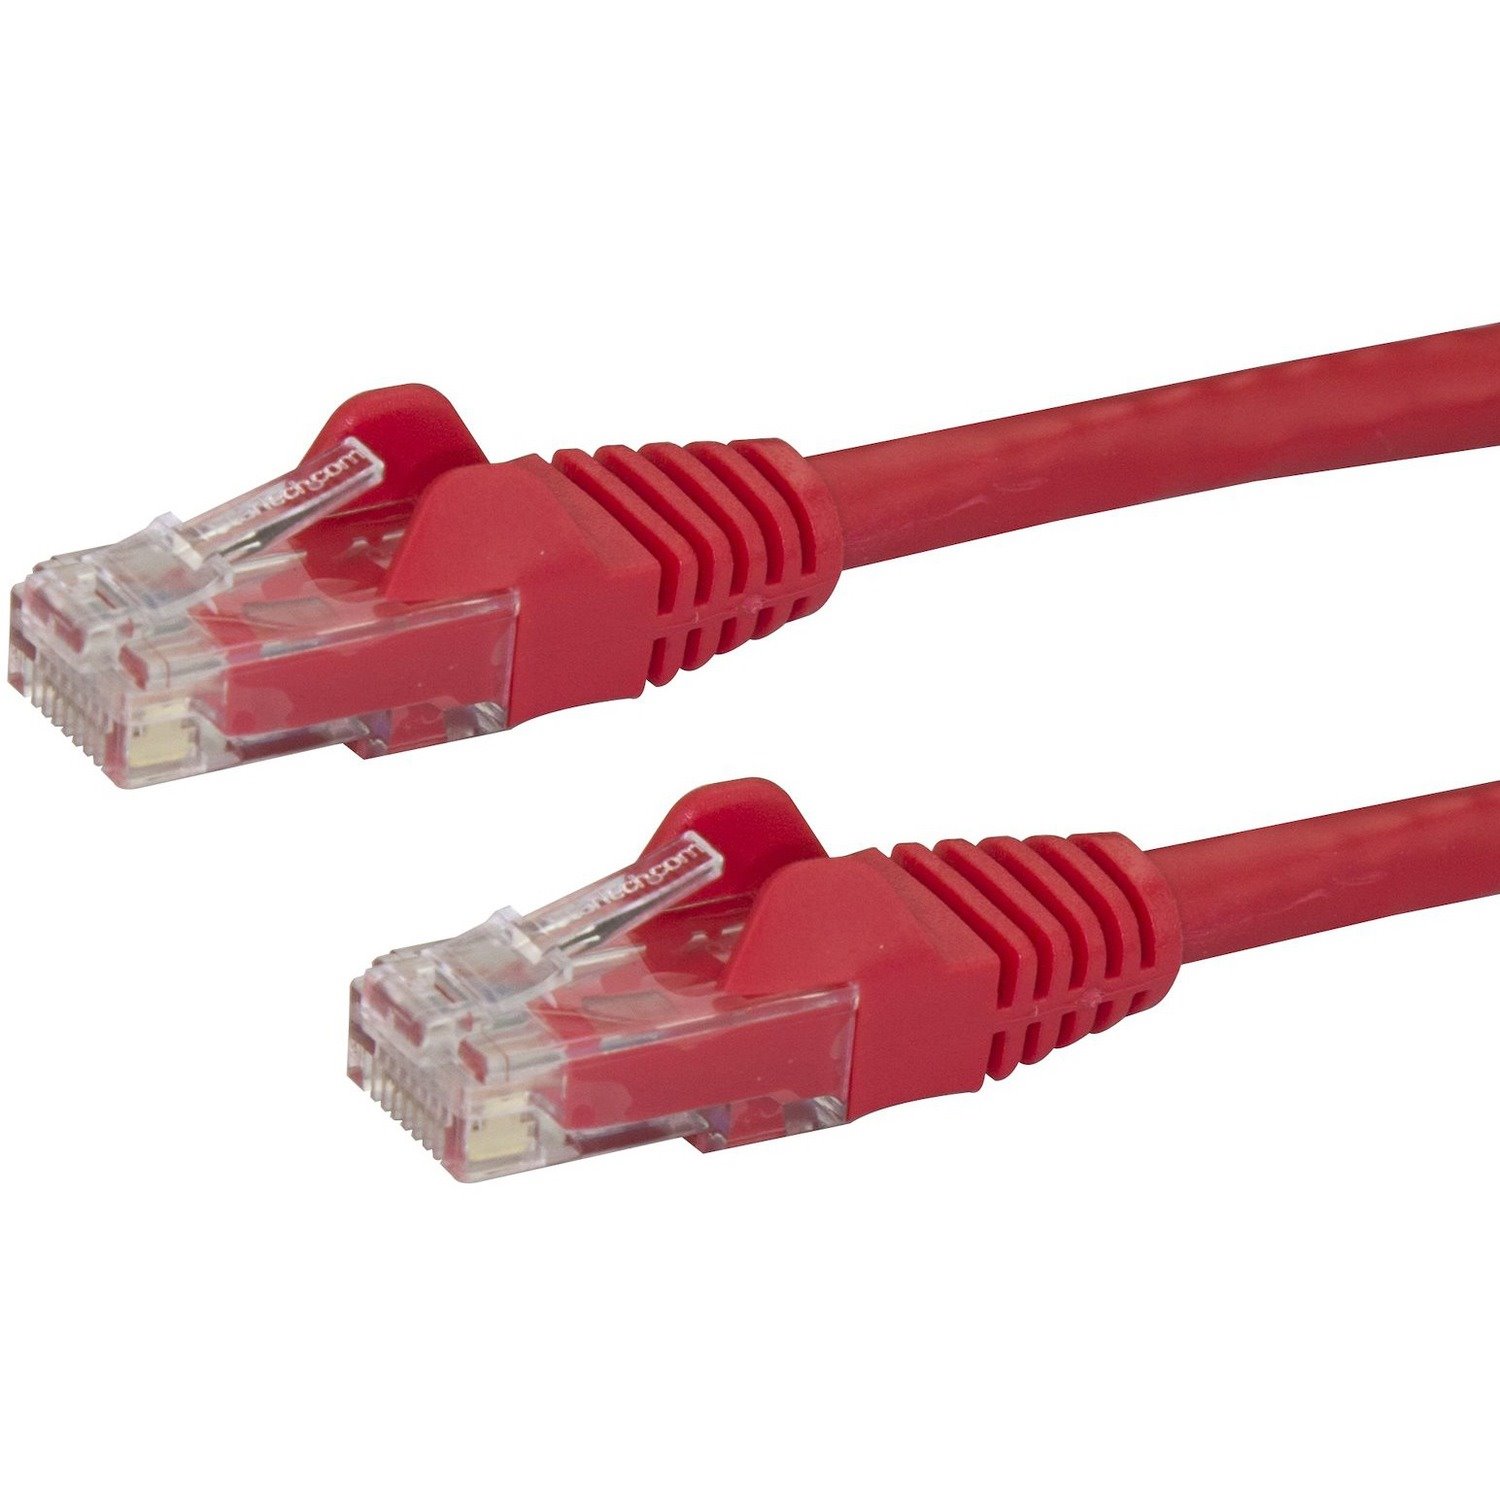 StarTech.com 2 m Category 6 Network Cable for Network Device - 1